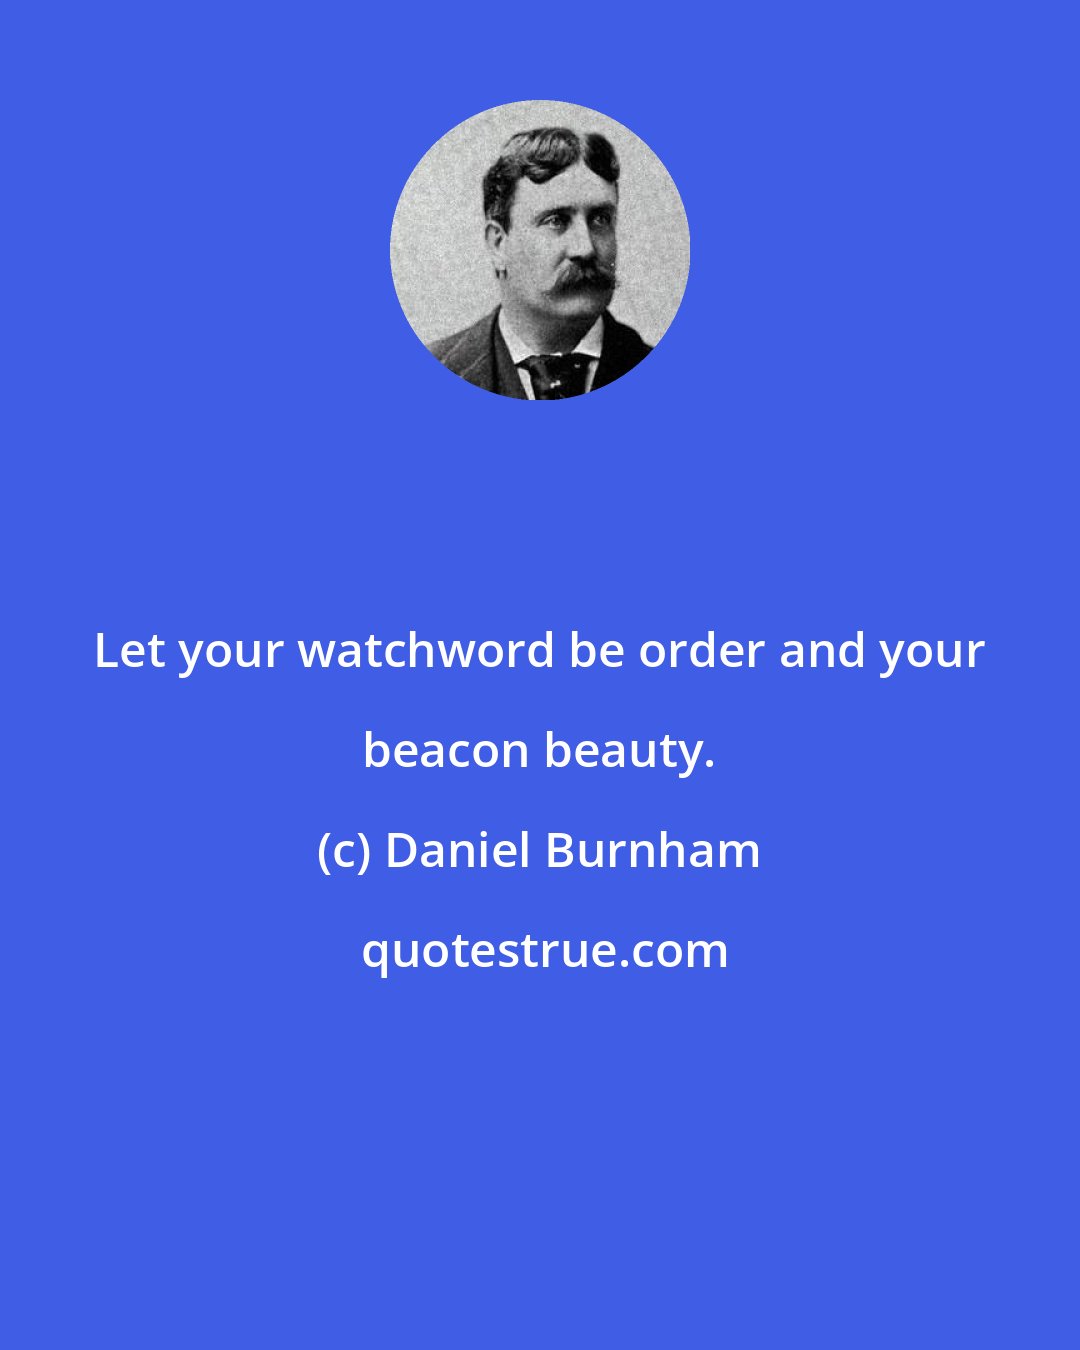 Daniel Burnham: Let your watchword be order and your beacon beauty.